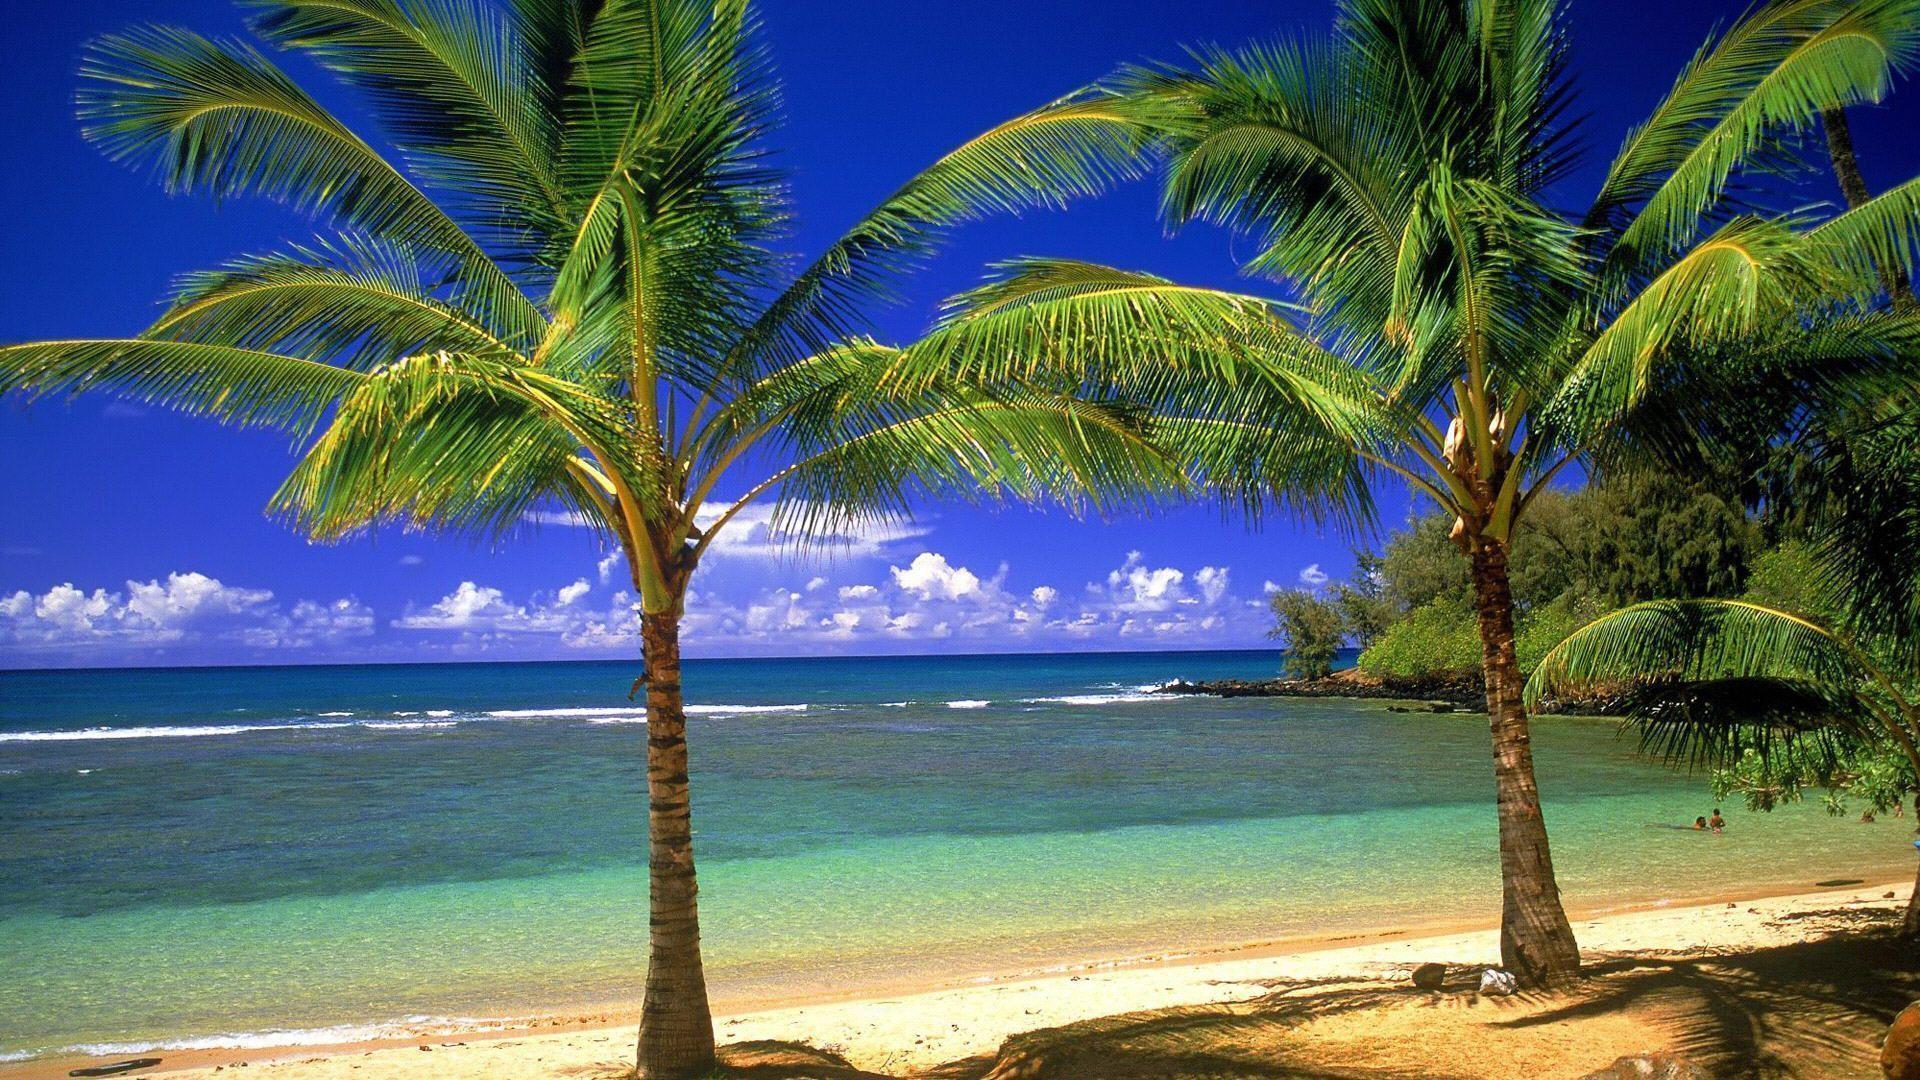 Summer Beach View Background 1 HD Wallpaper. Hdimges